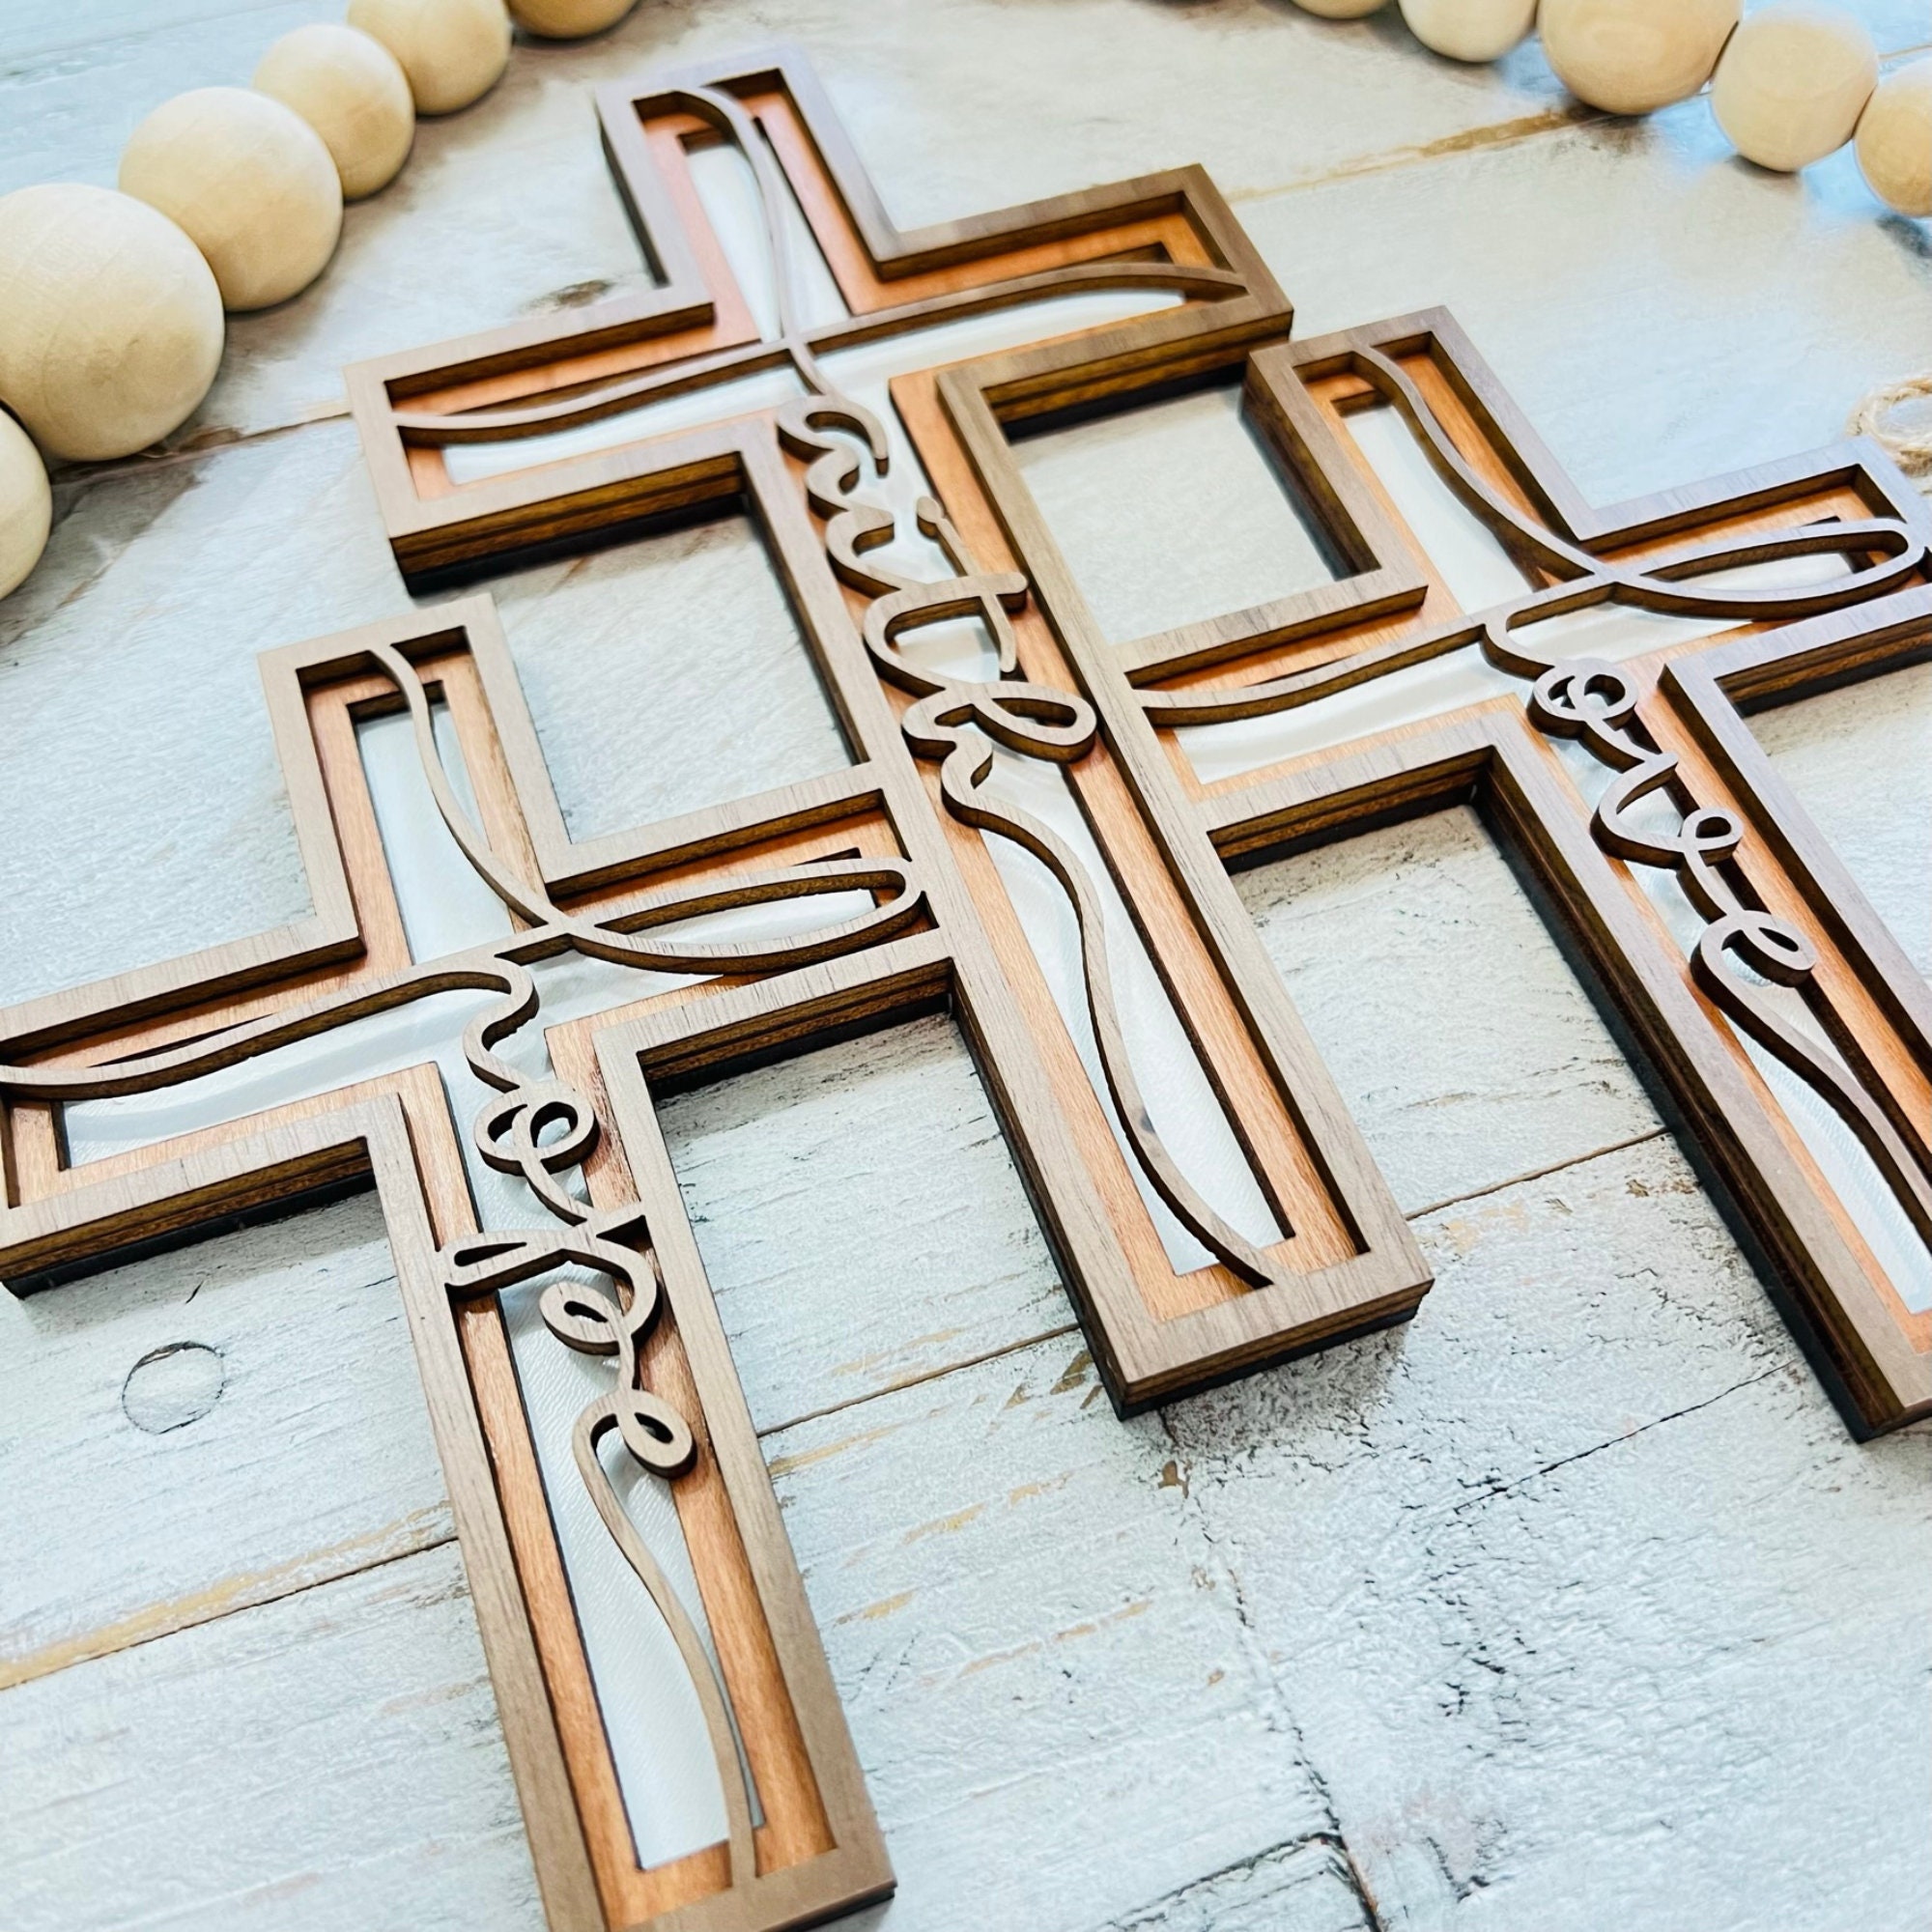 LGFMGWH 60Pack Small Wooden Crosses in Bulk, Wooden Crosses for Crafts, Cross Charms with 60 Chains, Wooden Cross Pendants for Necklace Bracelet